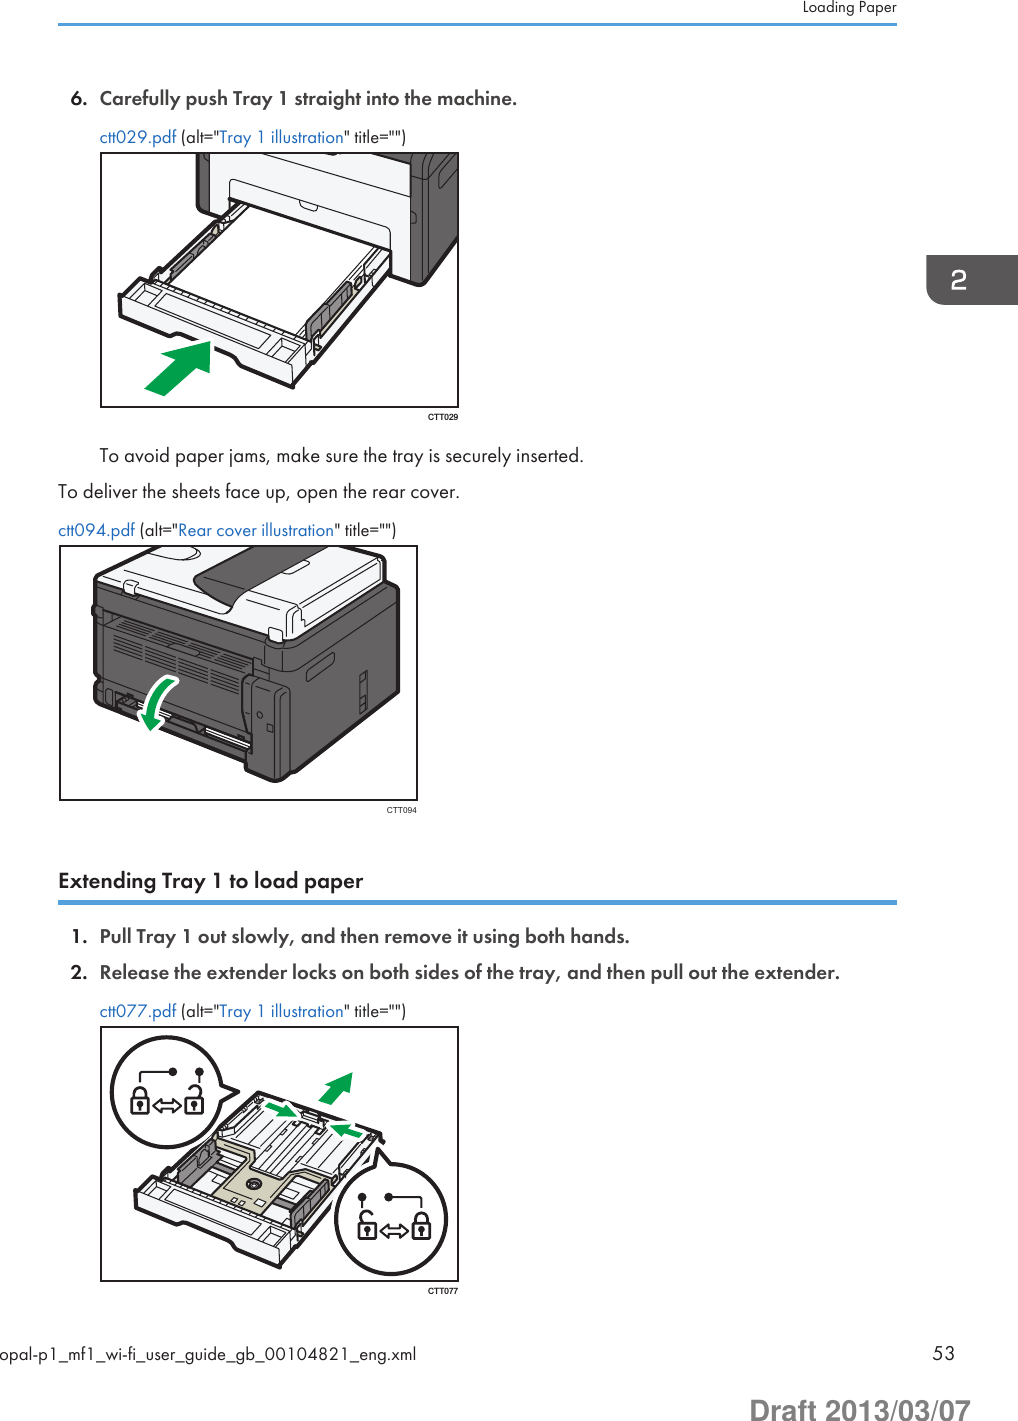 6. Carefully push Tray 1 straight into the machine.ctt029.pdf (alt=&quot;Tray 1 illustration&quot; title=&quot;&quot;)CTT029To avoid paper jams, make sure the tray is securely inserted.To deliver the sheets face up, open the rear cover.ctt094.pdf (alt=&quot;Rear cover illustration&quot; title=&quot;&quot;)CTT094Extending Tray 1 to load paper1. Pull Tray 1 out slowly, and then remove it using both hands.2. Release the extender locks on both sides of the tray, and then pull out the extender.ctt077.pdf (alt=&quot;Tray 1 illustration&quot; title=&quot;&quot;)CTT077Loading Paperopal-p1_mf1_wi-fi_user_guide_gb_00104821_eng.xml 53Draft 2013/03/07